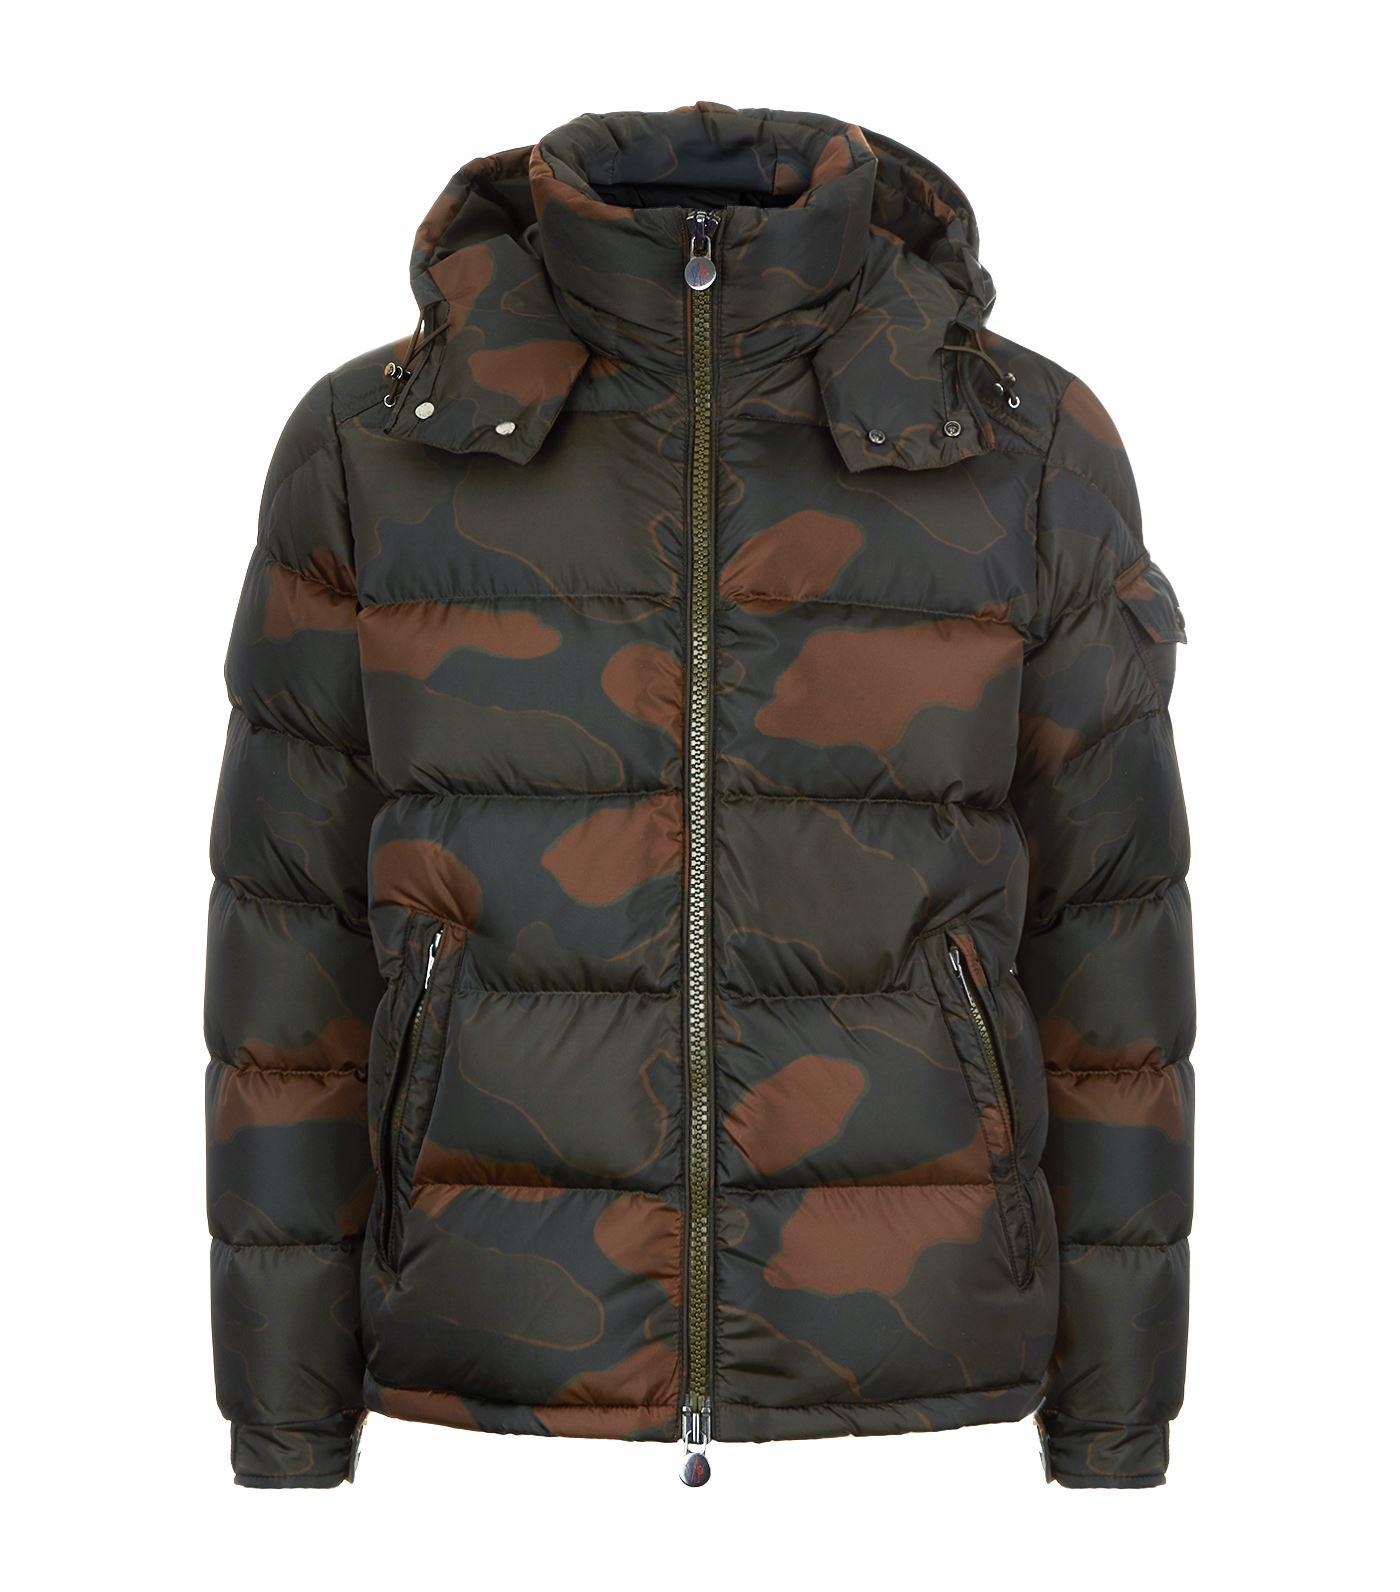 Moncler Goose Maya Camouflage Print Puffer Jacket in Green for Men - Lyst